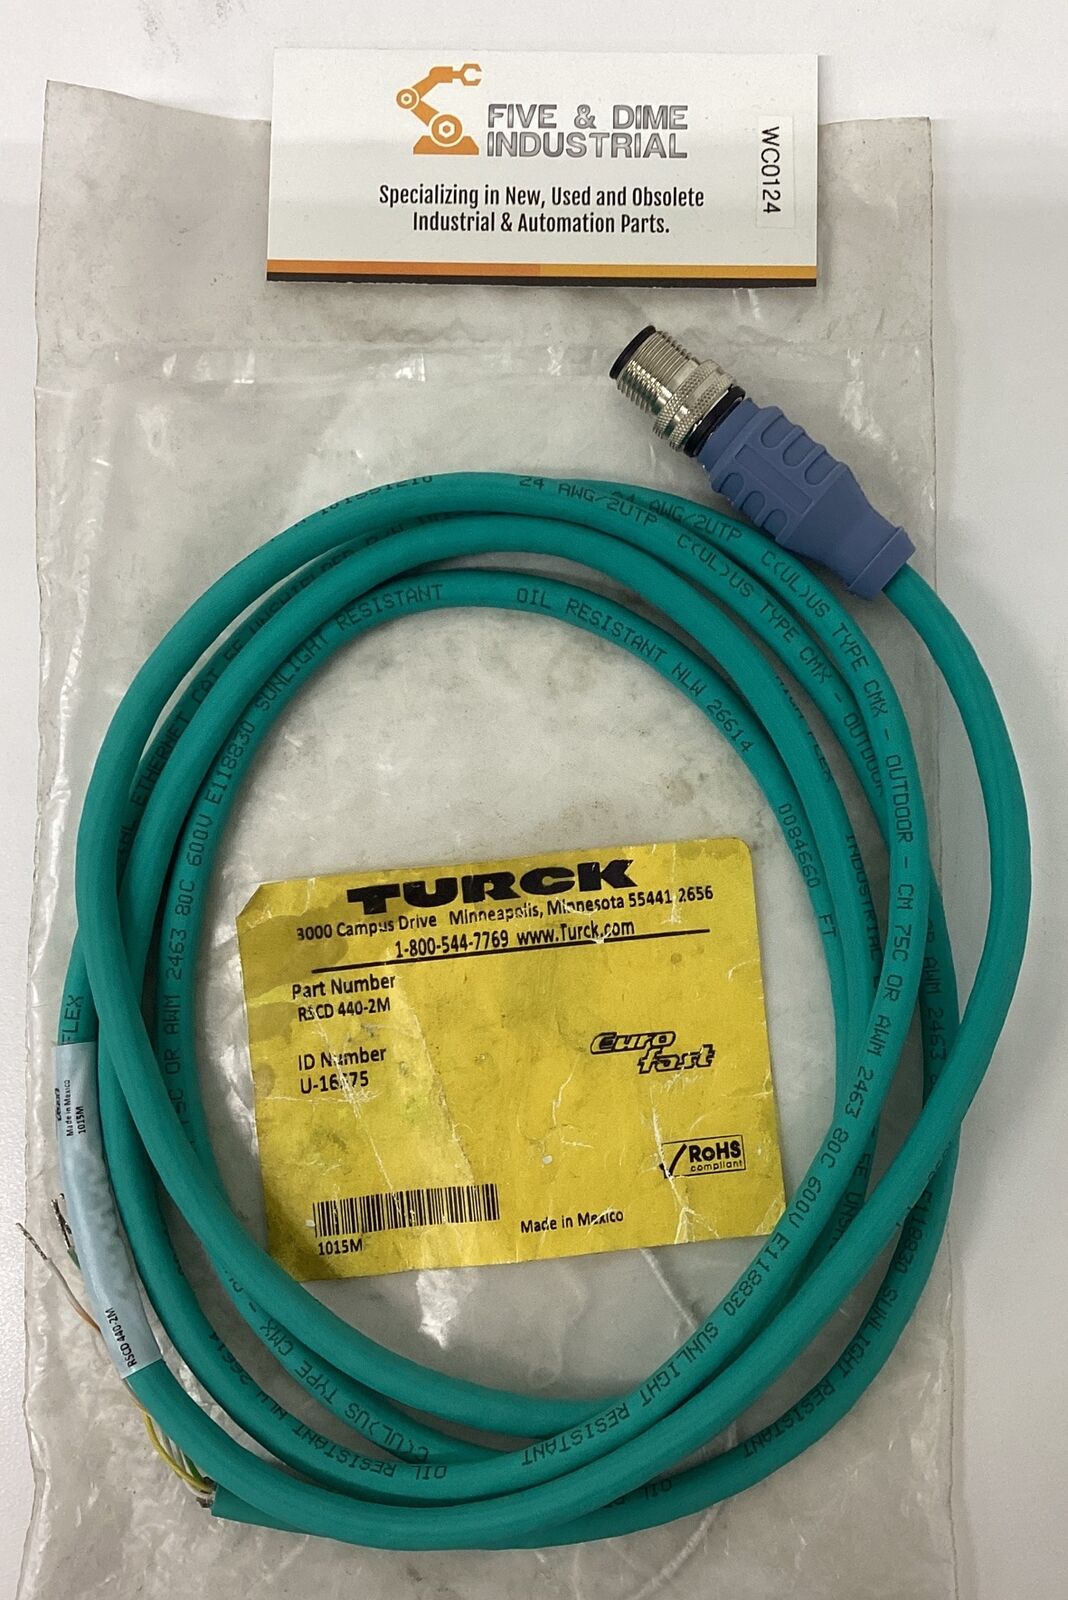 Turck RSCD 440-2M Network Cable 4-Pin to Wire 2-Meters NEW (CL186)